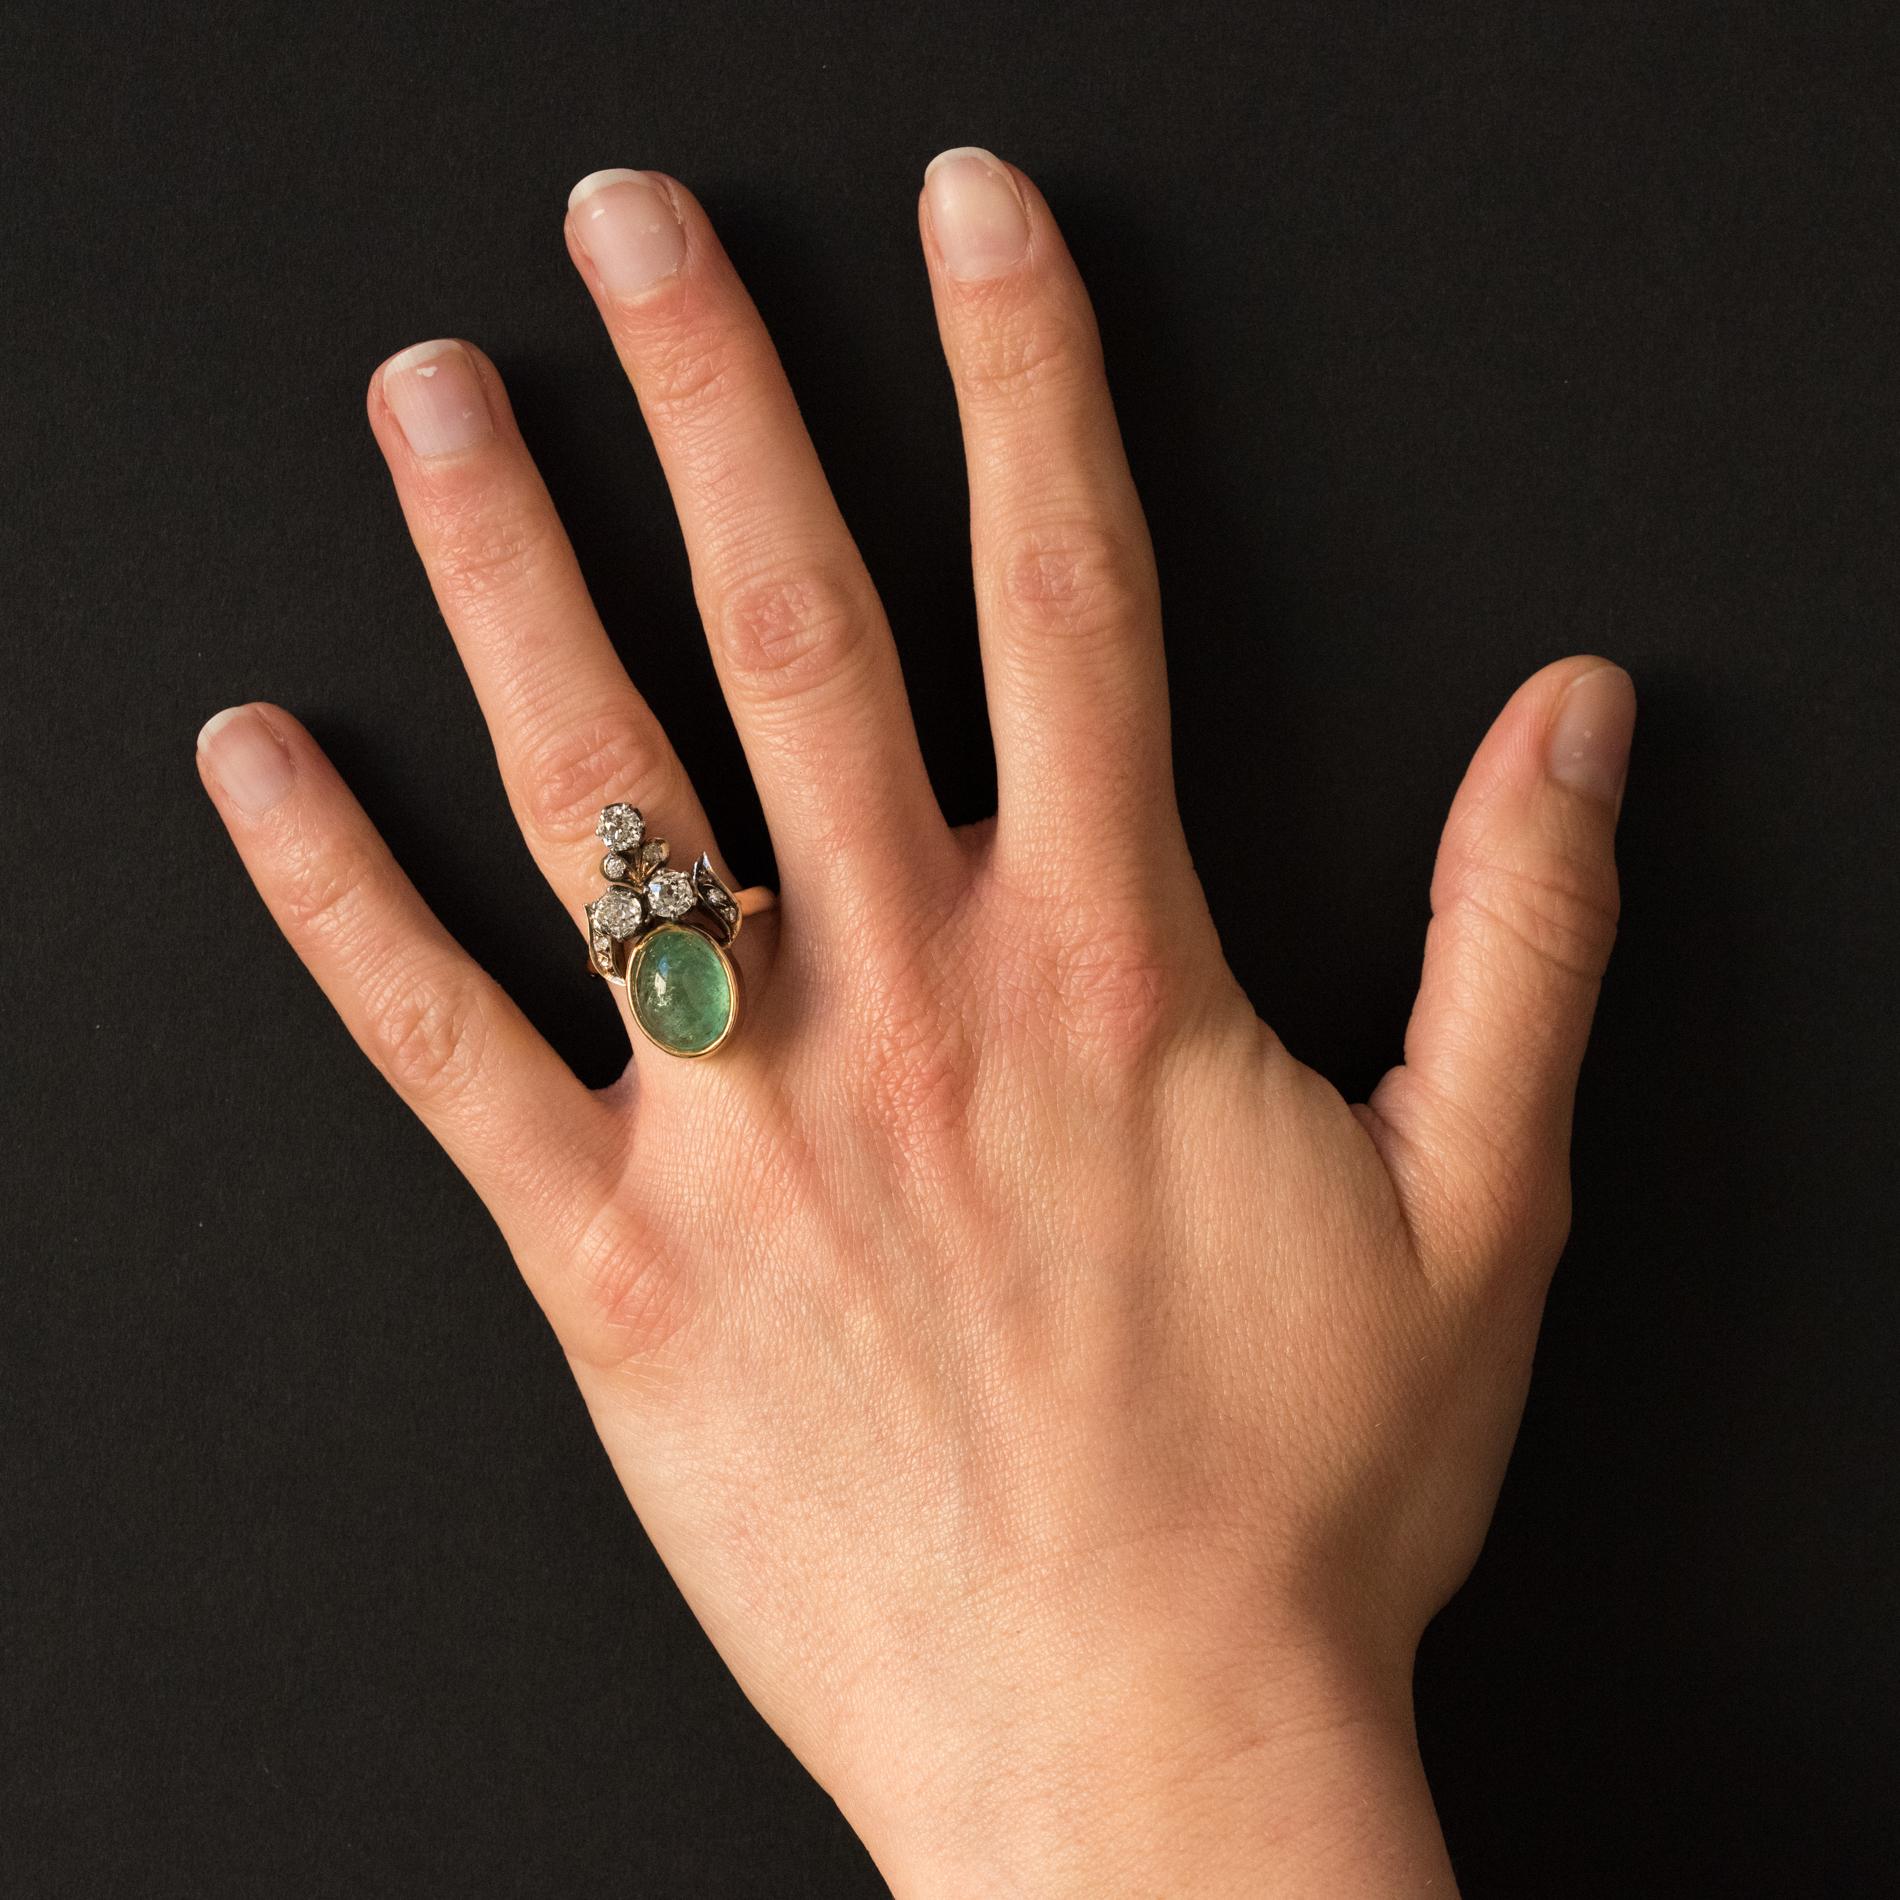 Ring in 18 karats yellow gold, weevil hallmark and silver.
Important antique ring called Duchess ring, it is set with a cabochon emerald in closed setting surmounted by 2 antique cushion- cut diamonds set with claws, and a fleur-de-lis motif set